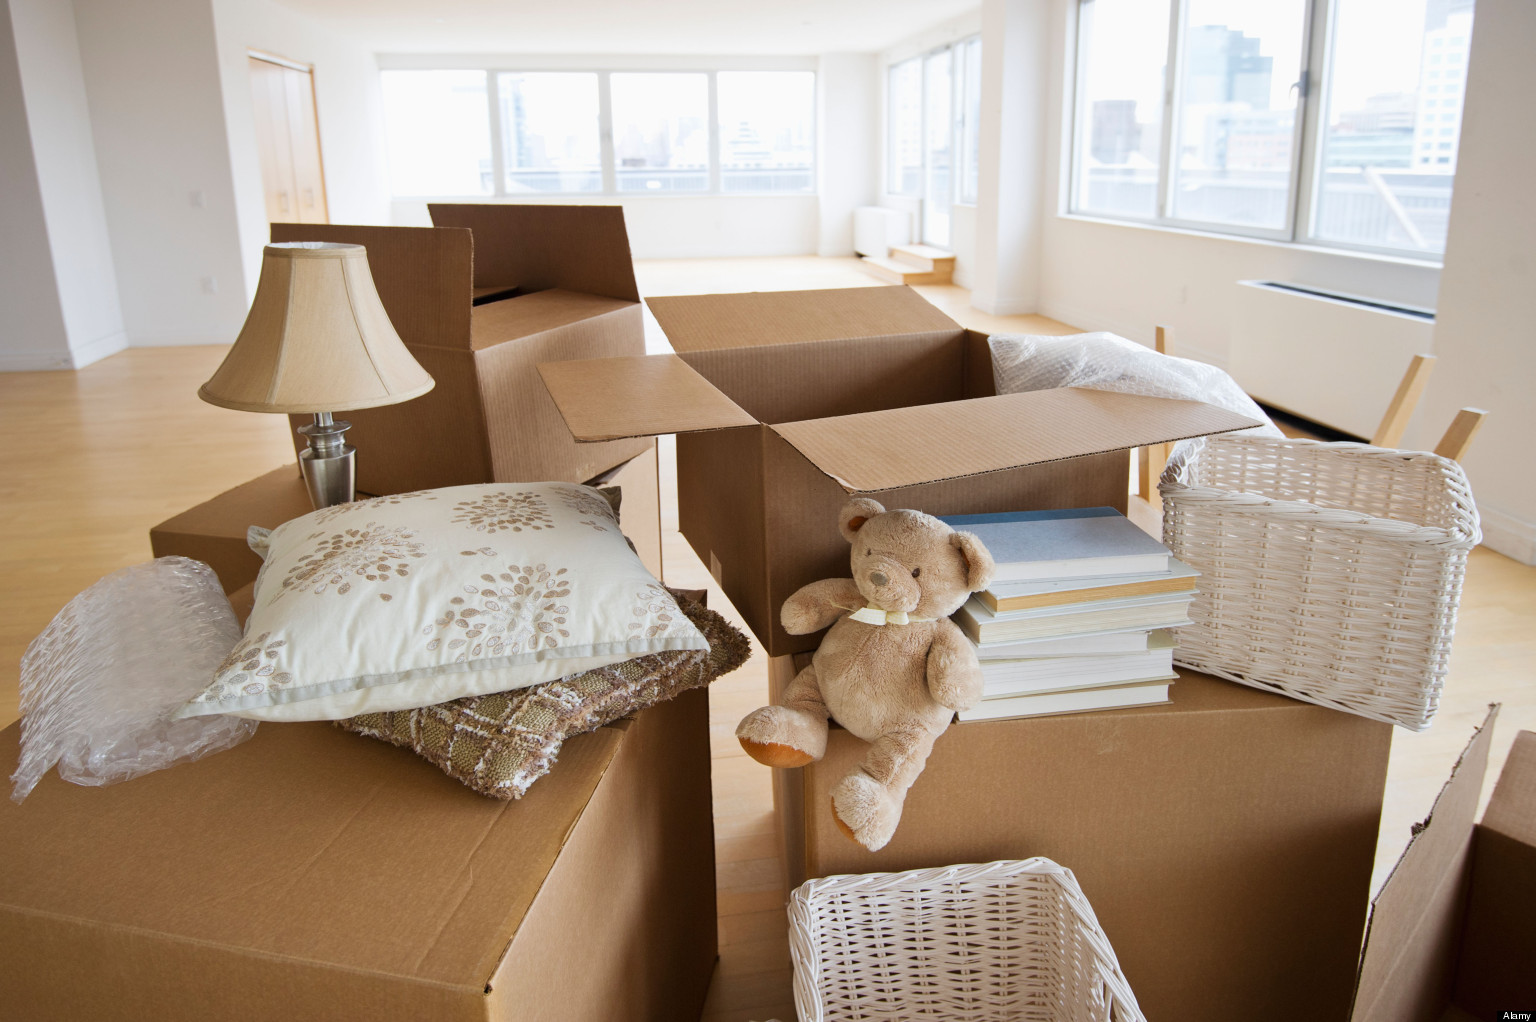 Moving Service Moving Services Calgary